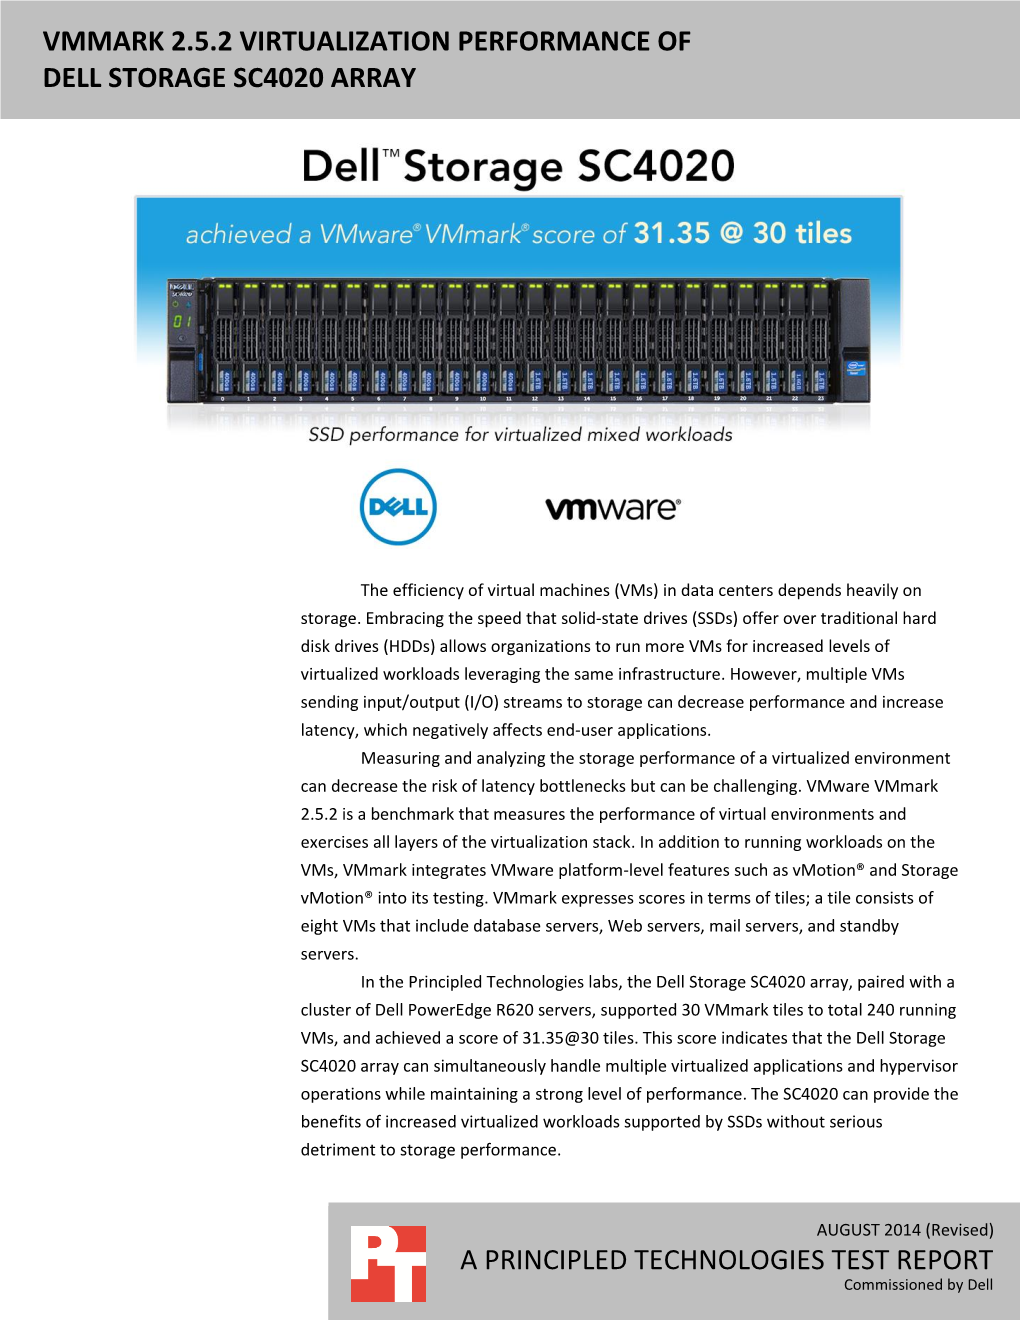 Vmmark 2.5.2 Virtualization Performance of the Dell Storage SC4020 Array